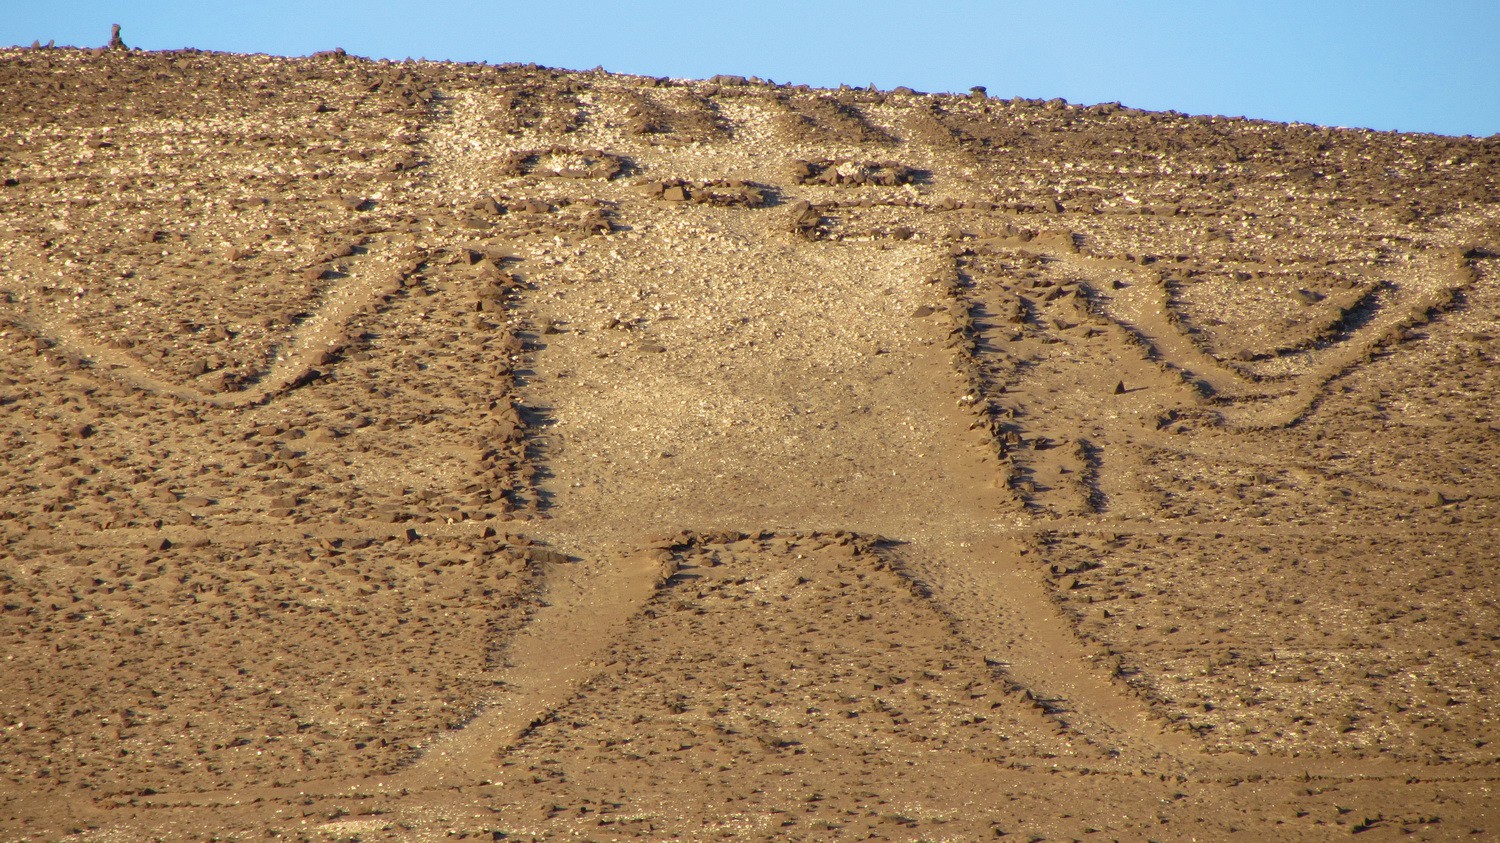 Gigante de Atacama with 86 meters high the largest geoglyph on earth